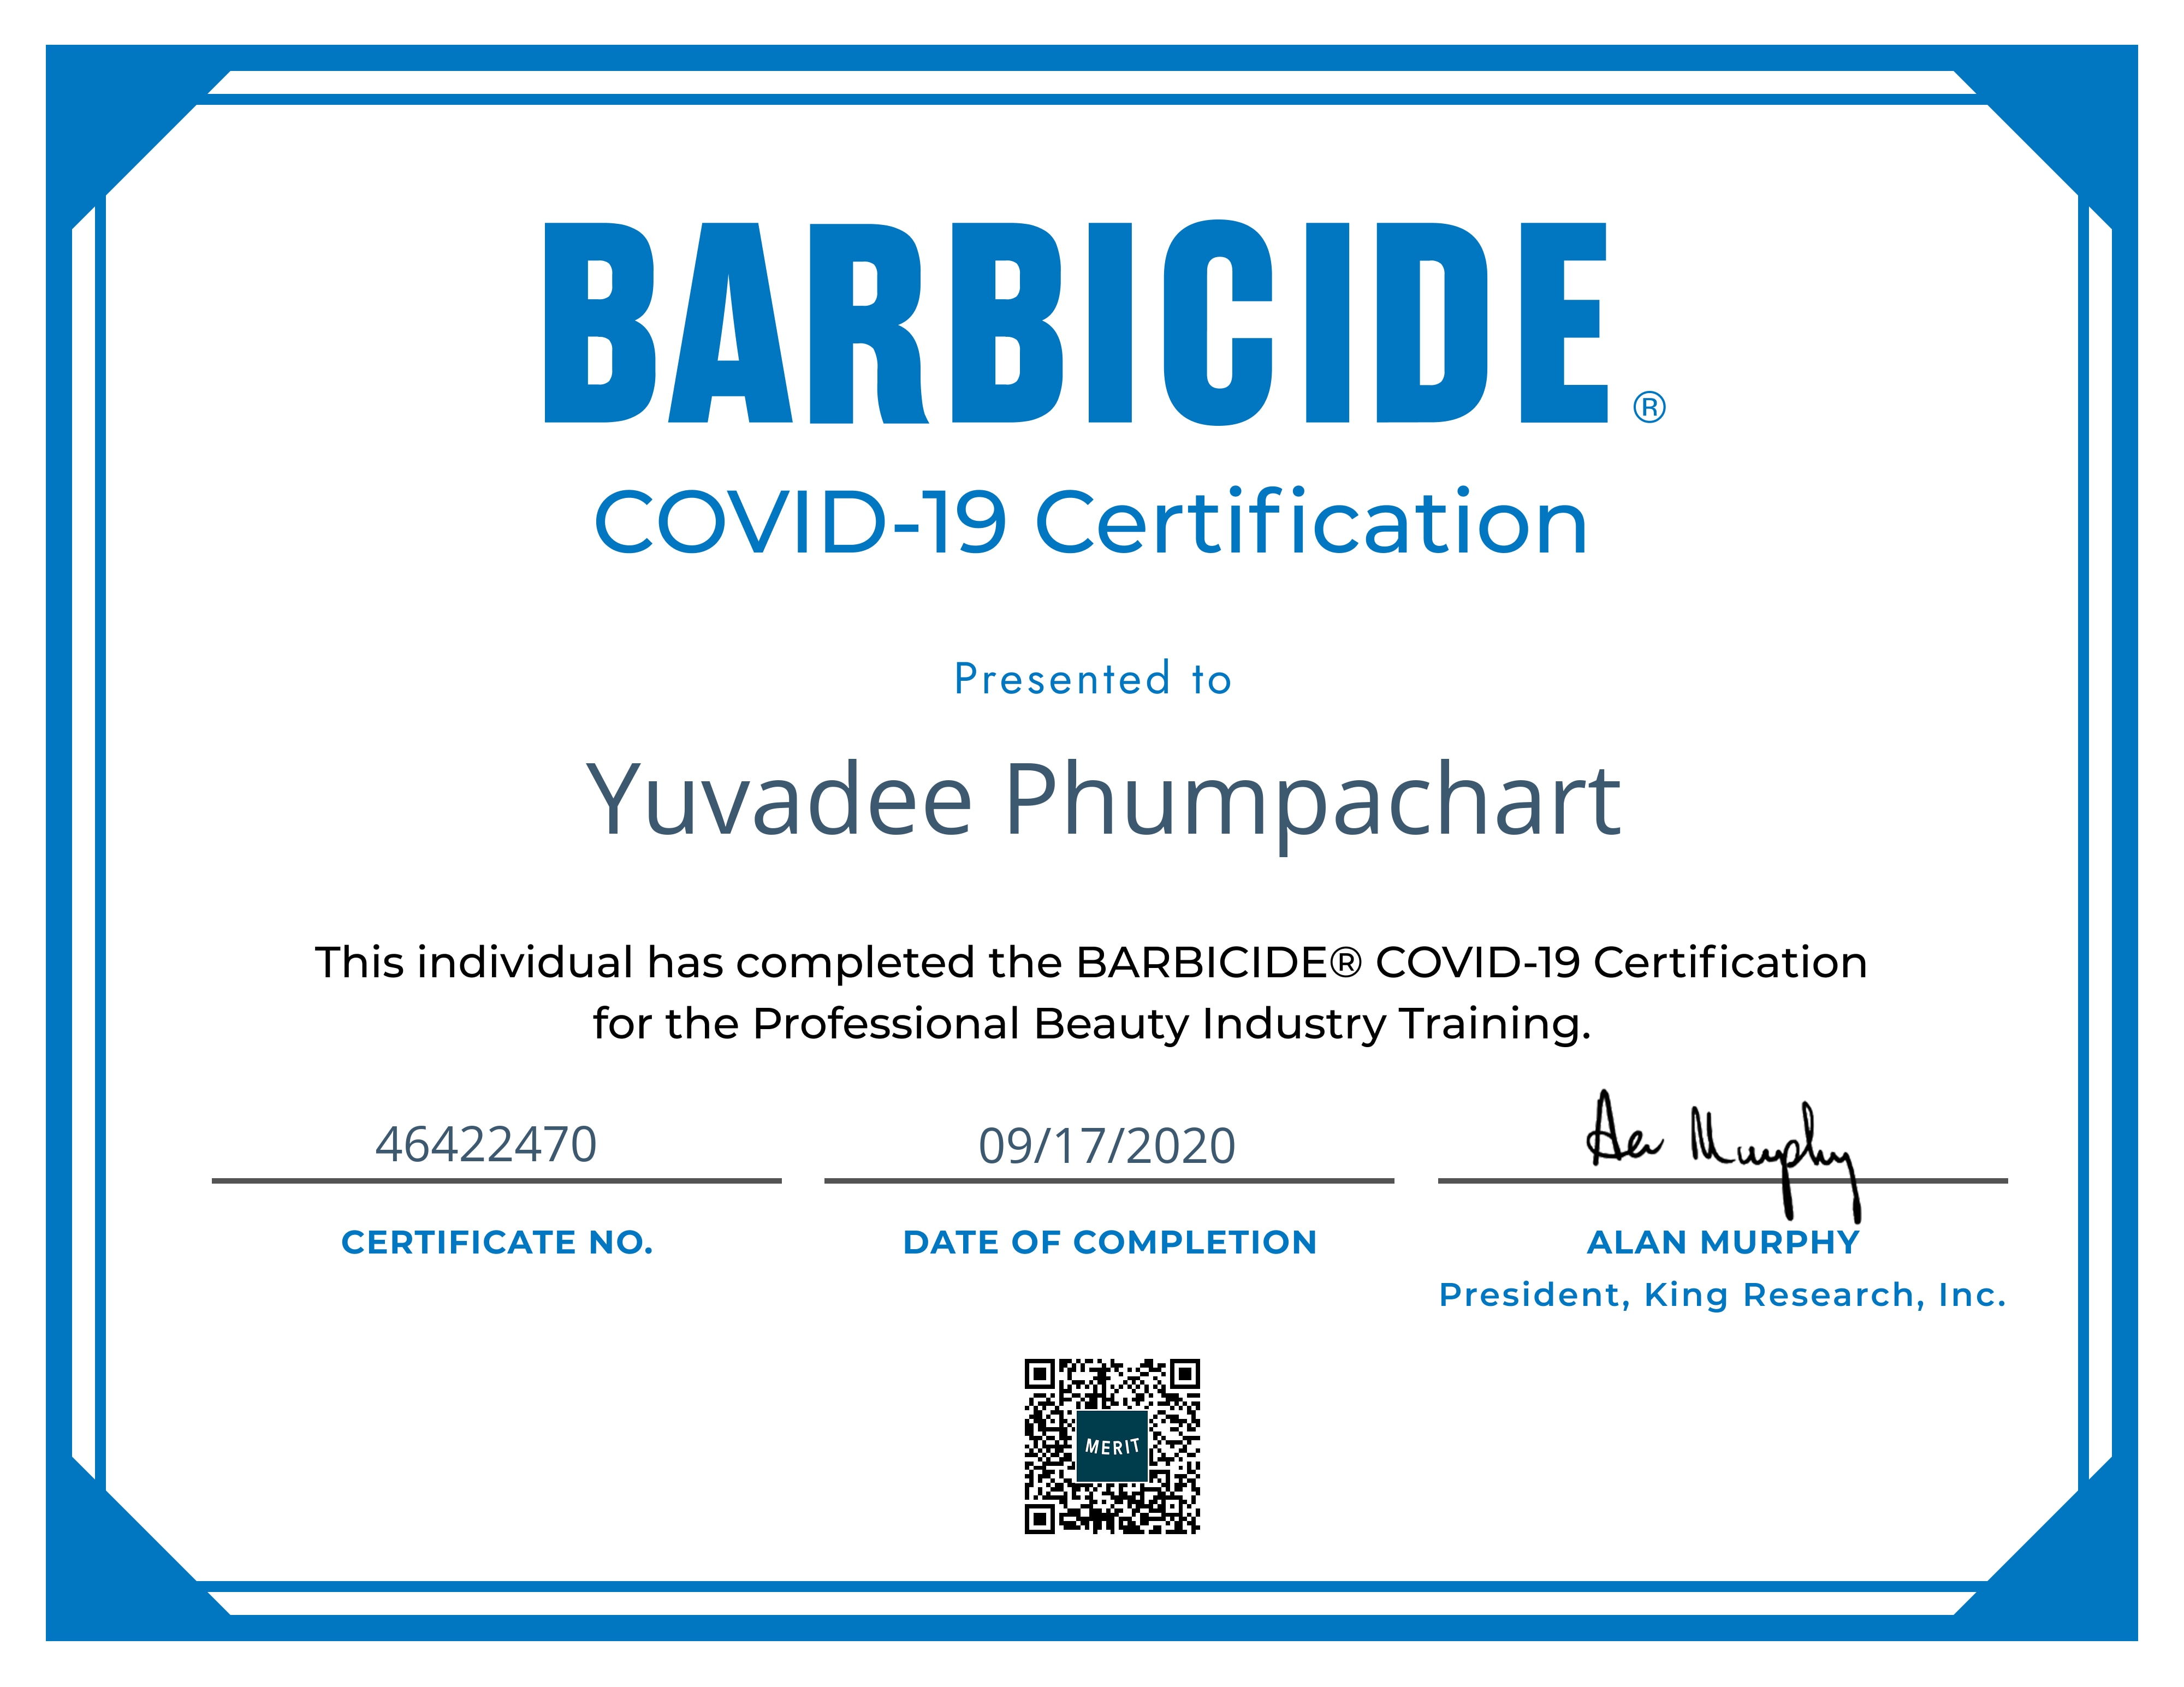 Digital certificate for a BARBICIDE® COVID-19 Certification merit sent to Yuvadee Phumpachart from BARBICIDE®